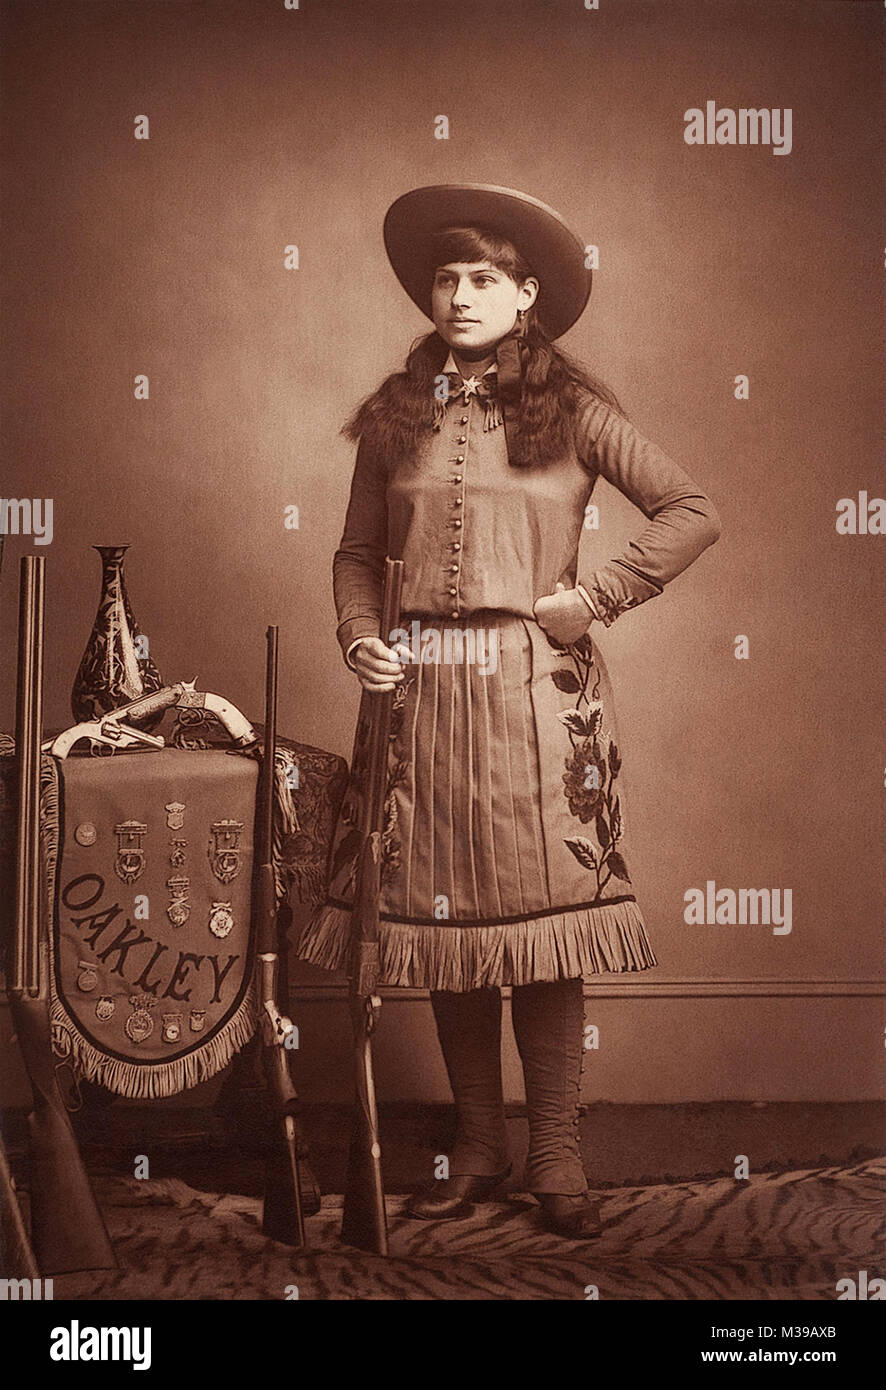 Annie Oakley (1860-1926) was an outstanding American sharpshooter who became famous while performing in Buffalo Bill's Wild West Show. Photo c1887-1880s by Elliott & Fry, London, England. Stock Photo